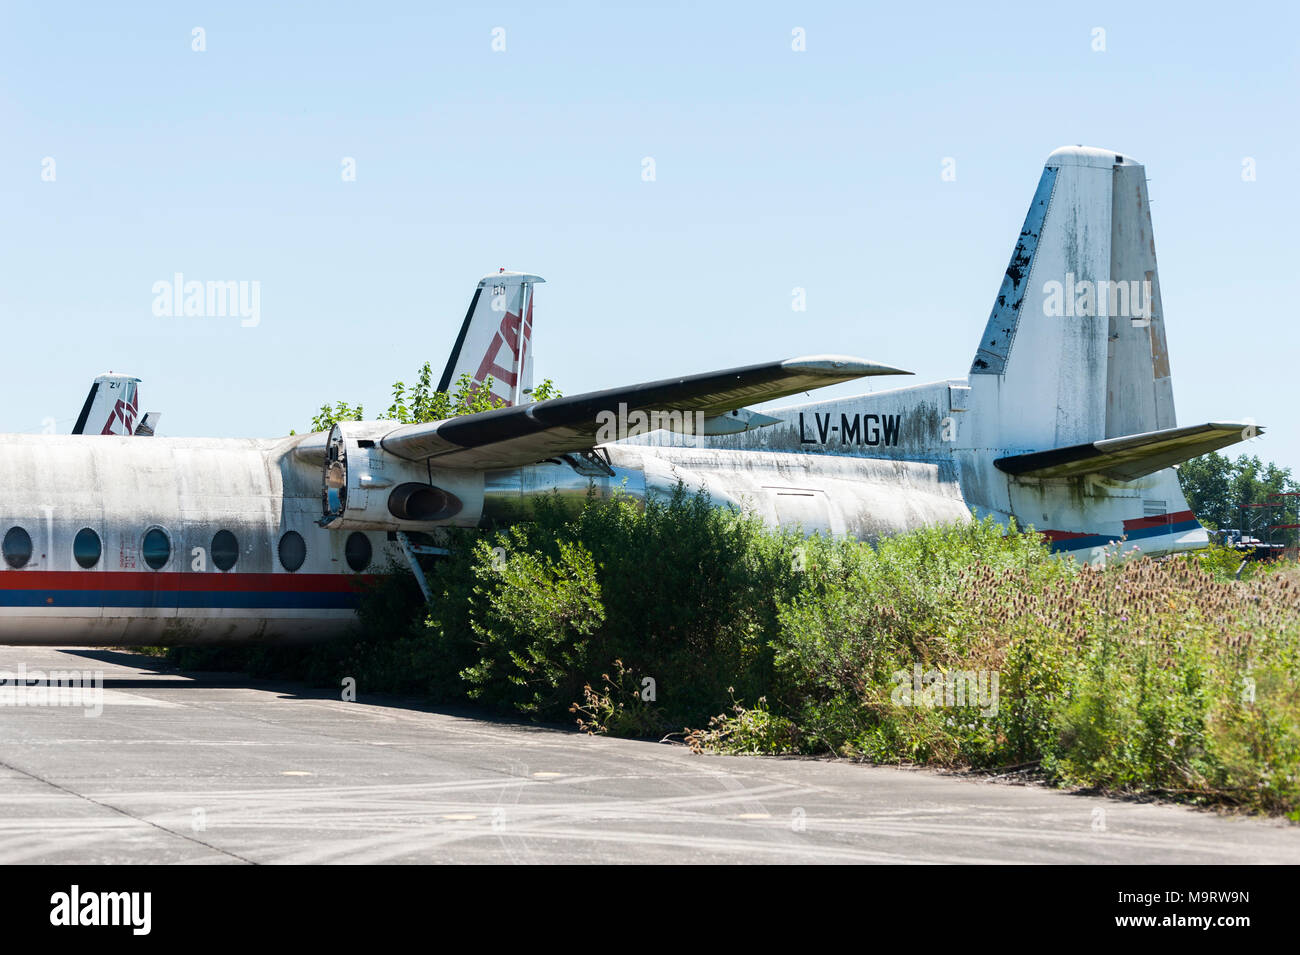 Nature taking over abandoned Fairchild airplanes of CATA Linea Aerea at the Moron Airport in Buenos Aires Stock Photo